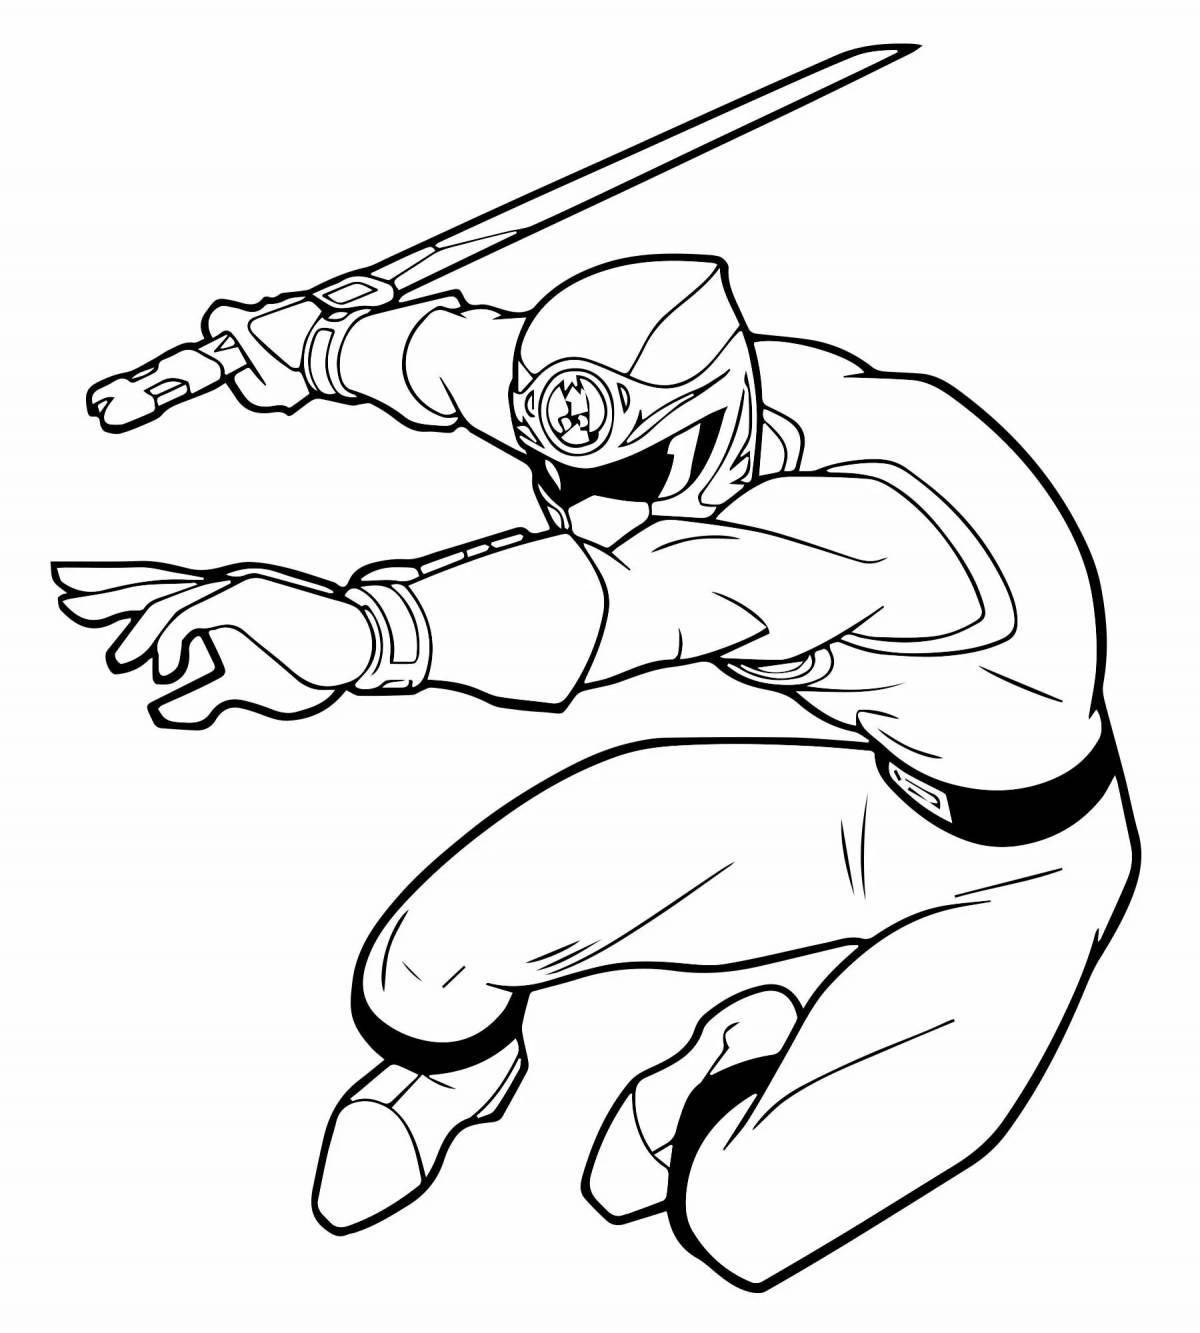 Animated gearfighters coloring pages